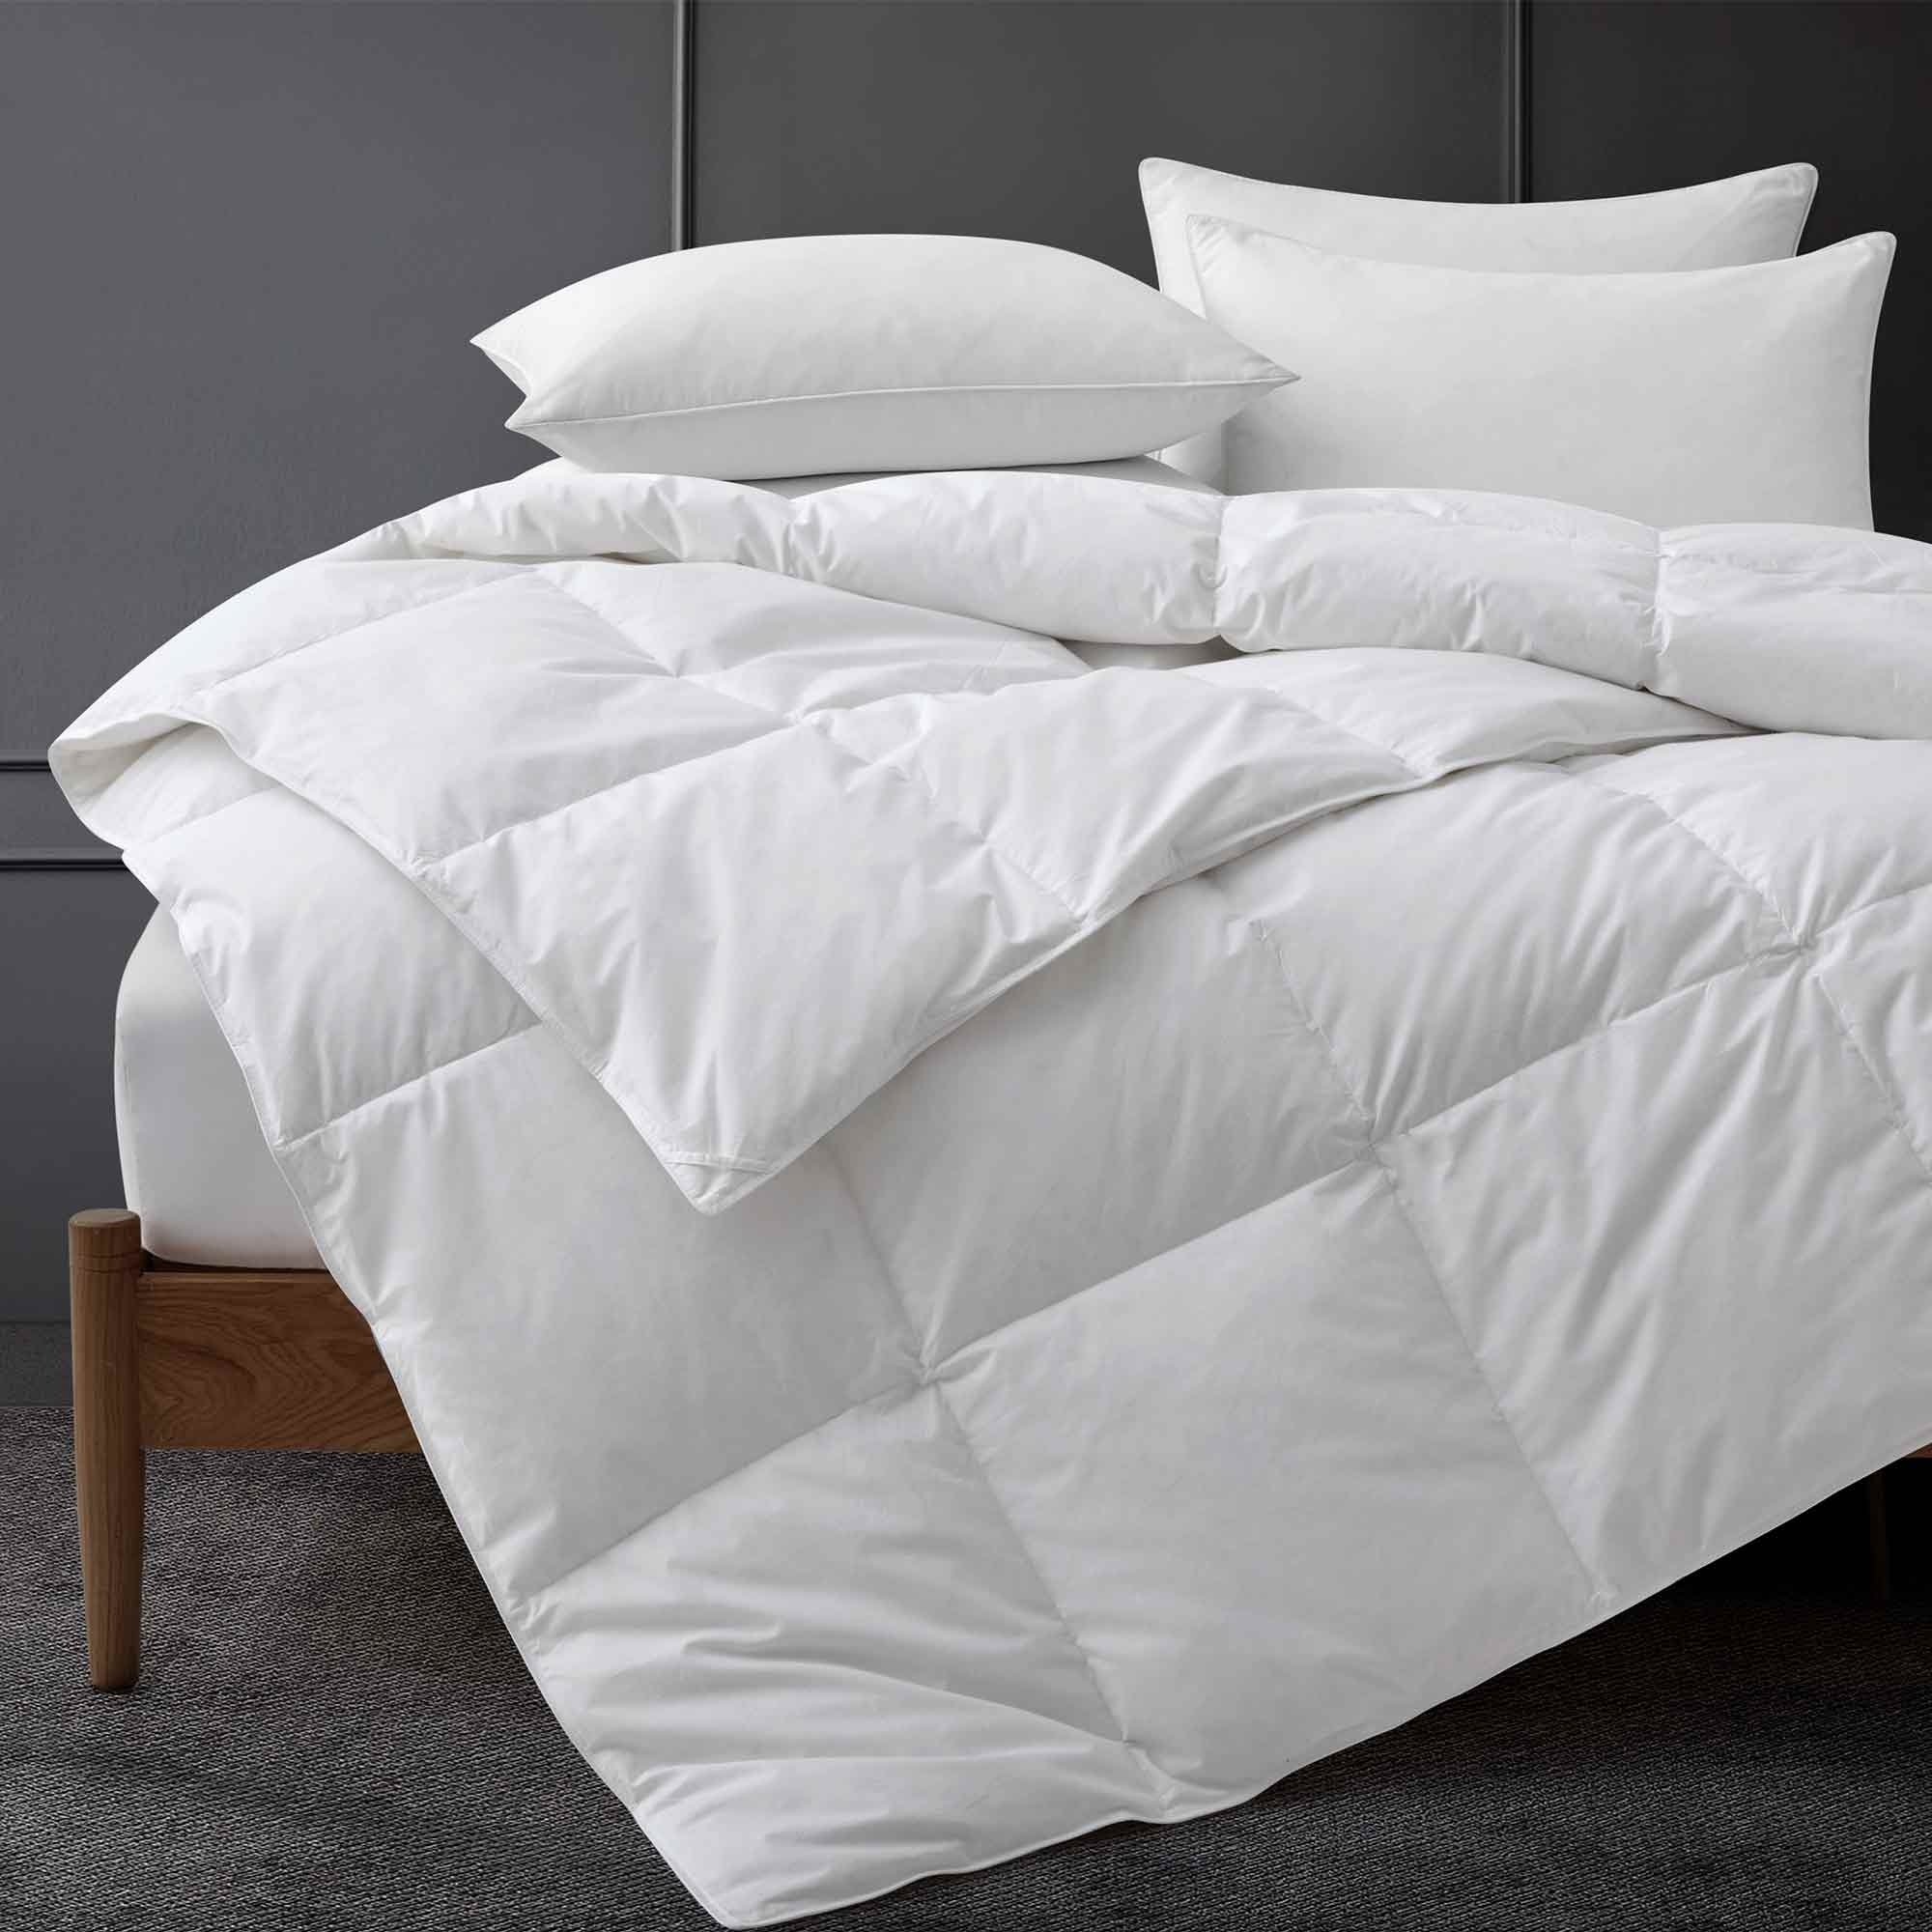 White Goose Feather And Down Comforters, Lightweight And Medium Weight Duvet Insert - Lightweight, Twin